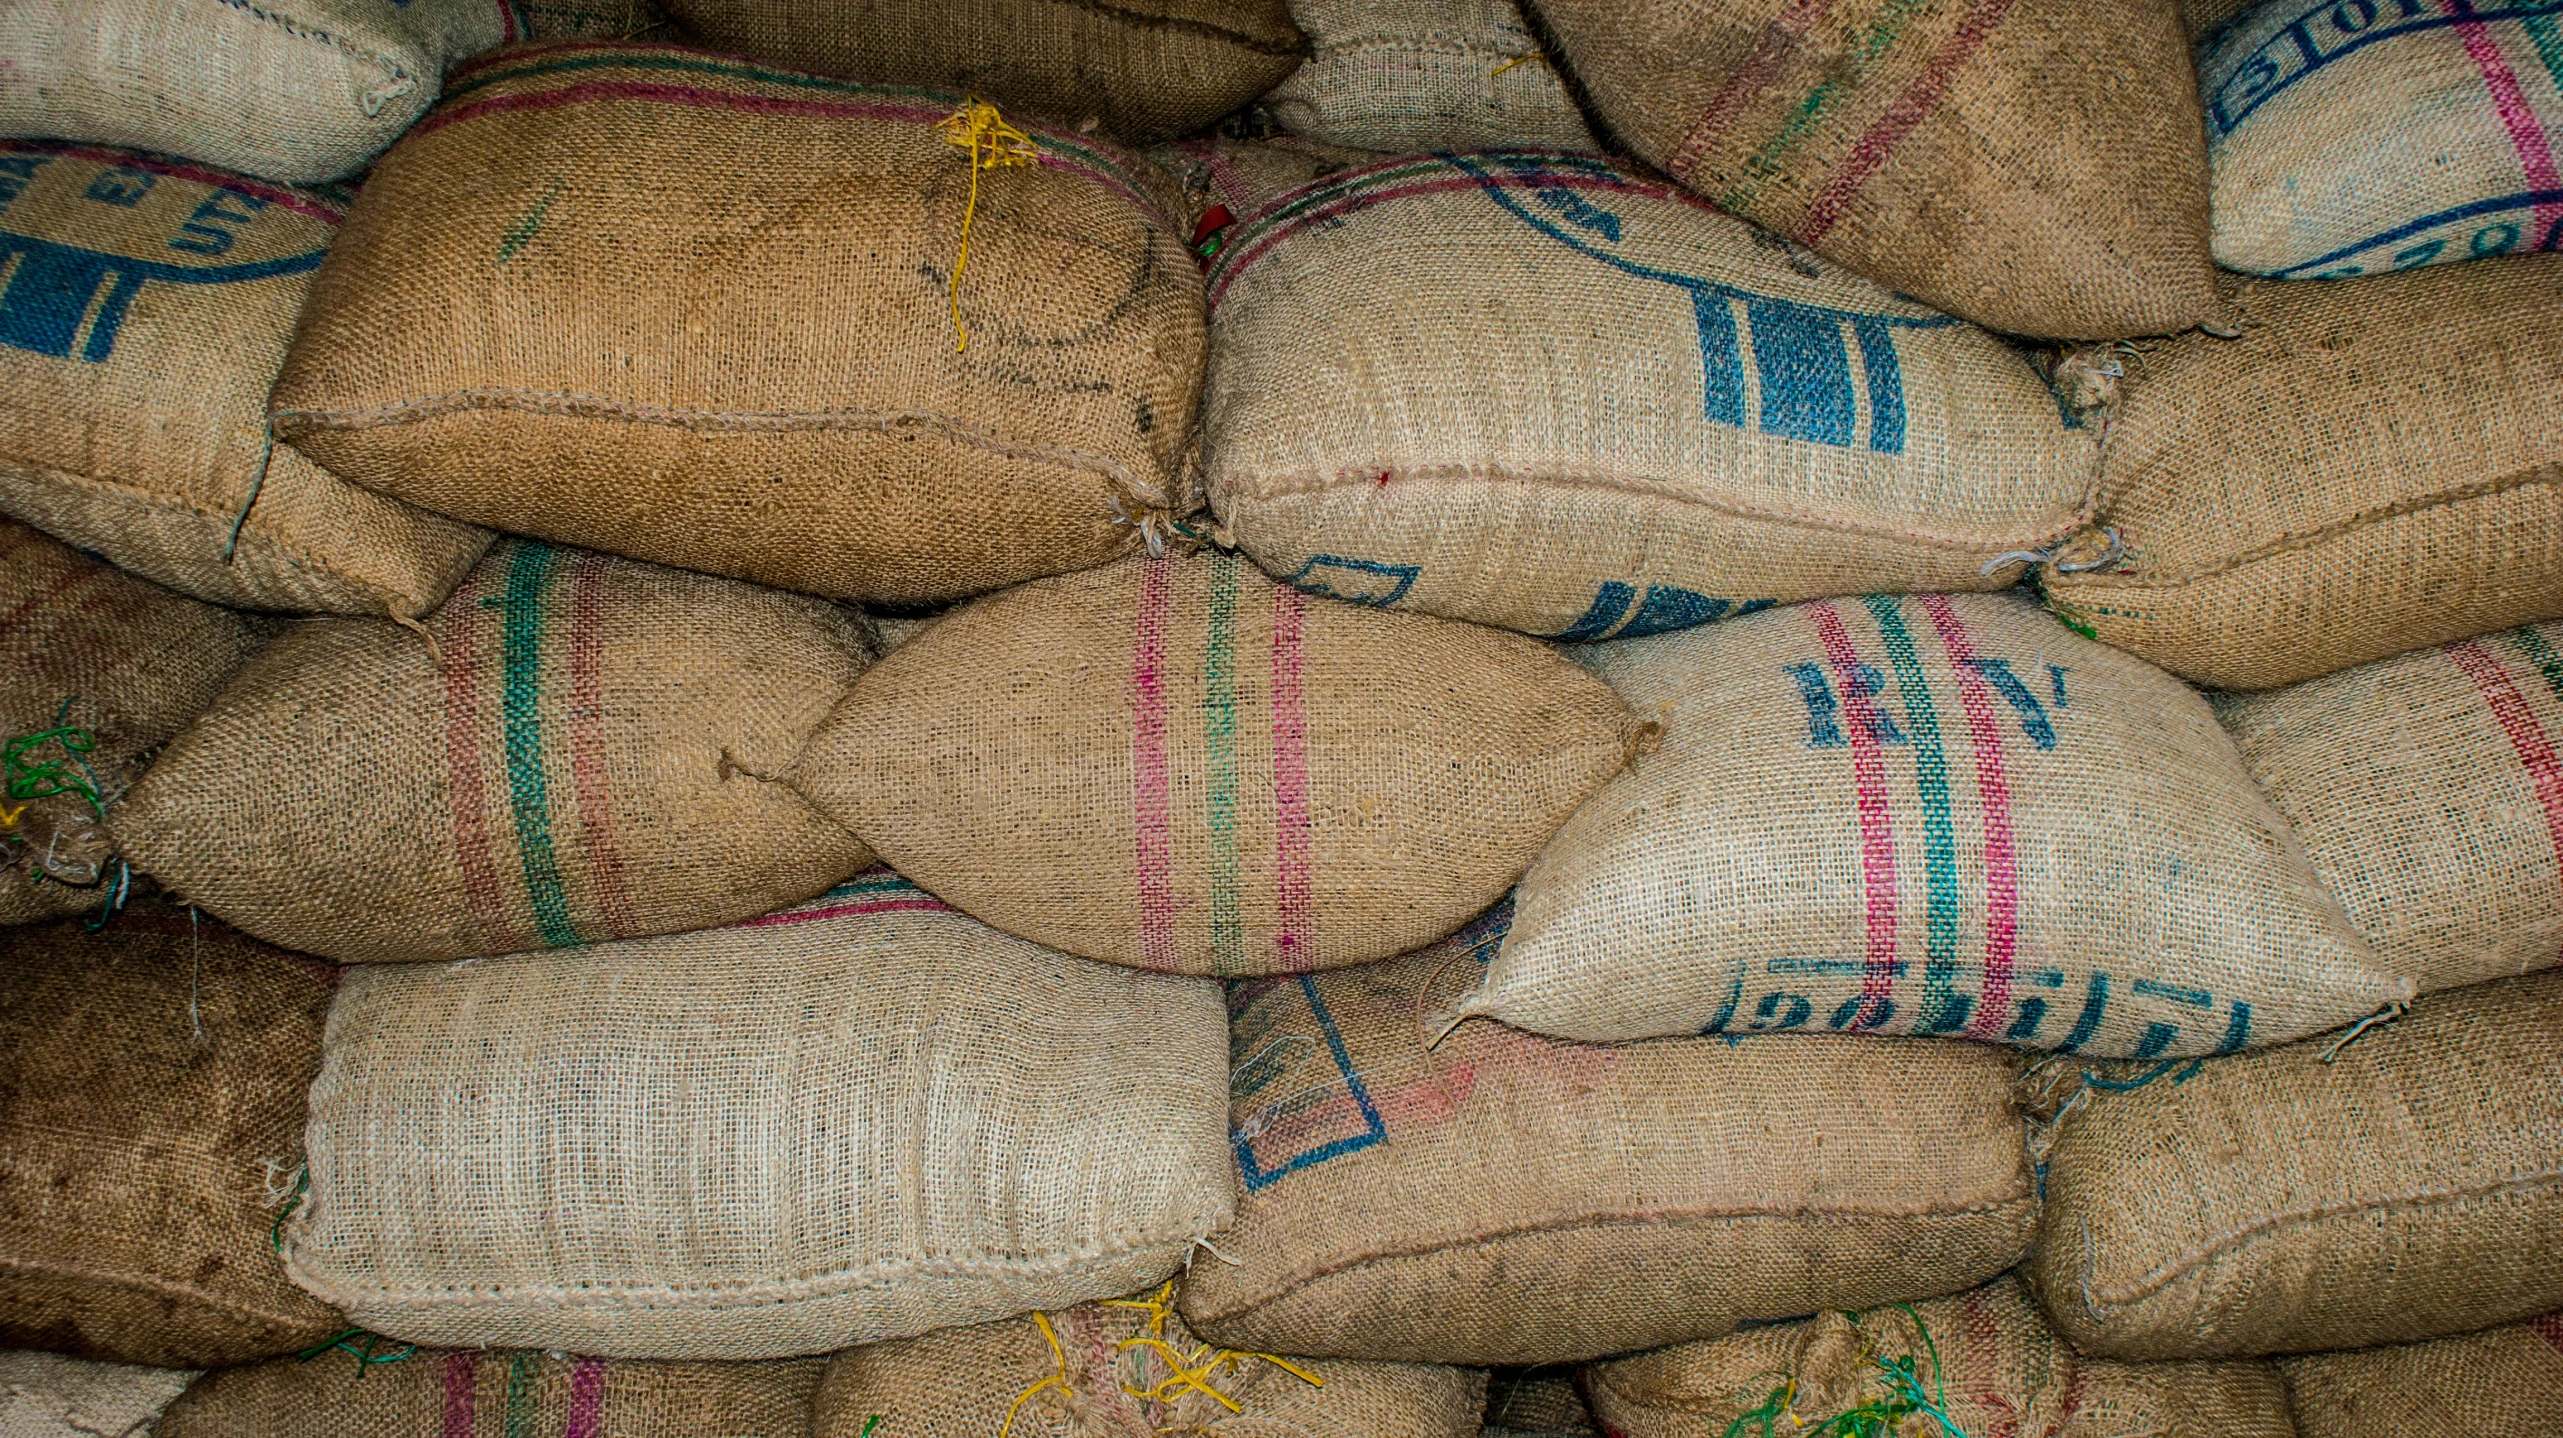 sacks and bags are stacked on top of each other